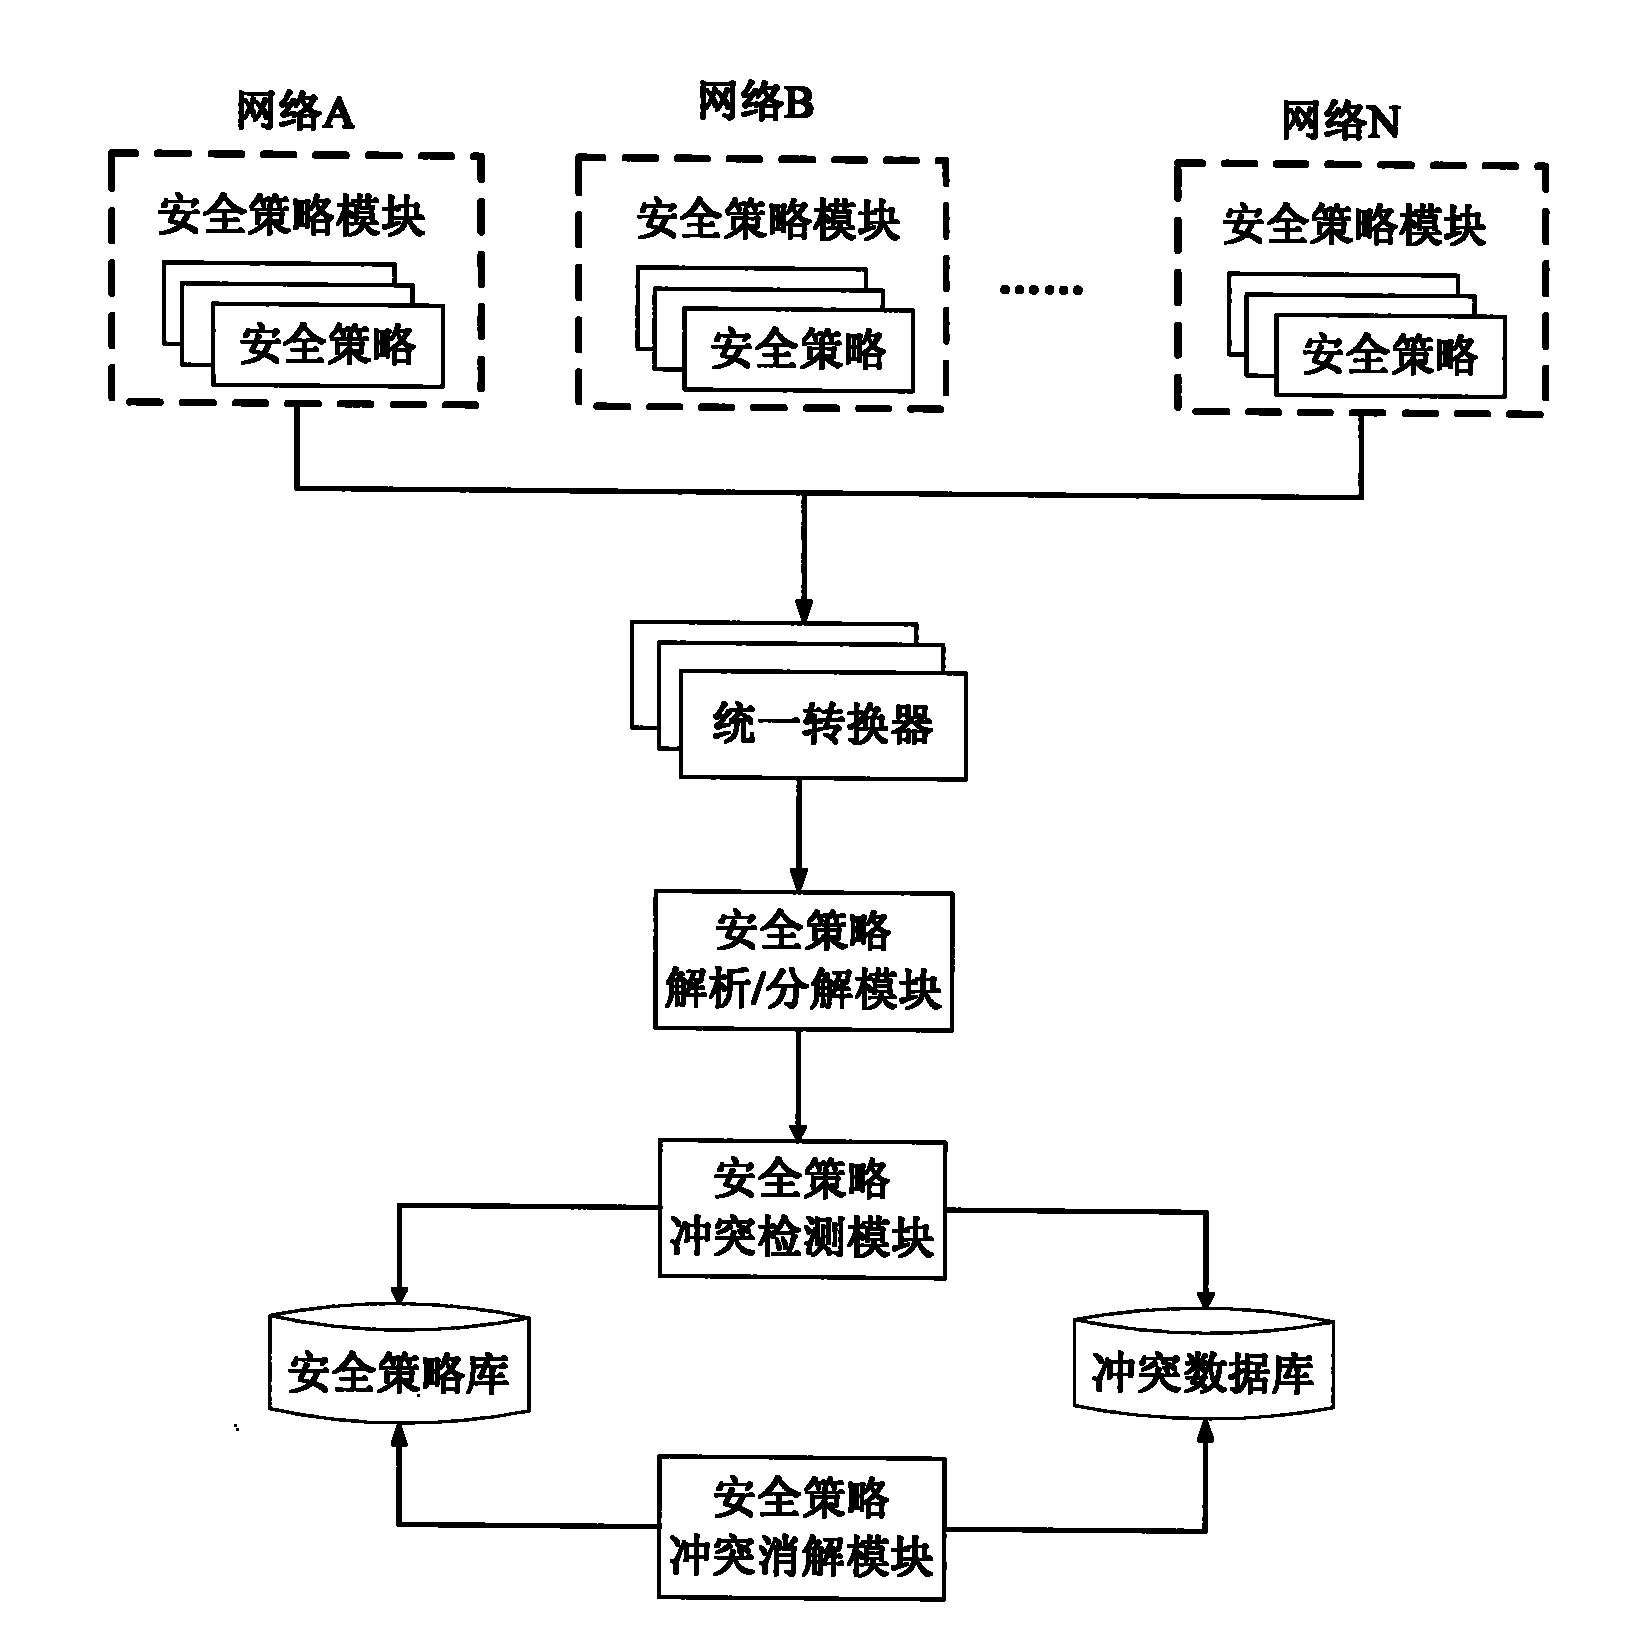 Method and architecture for handling conflict of security policies and unified converter